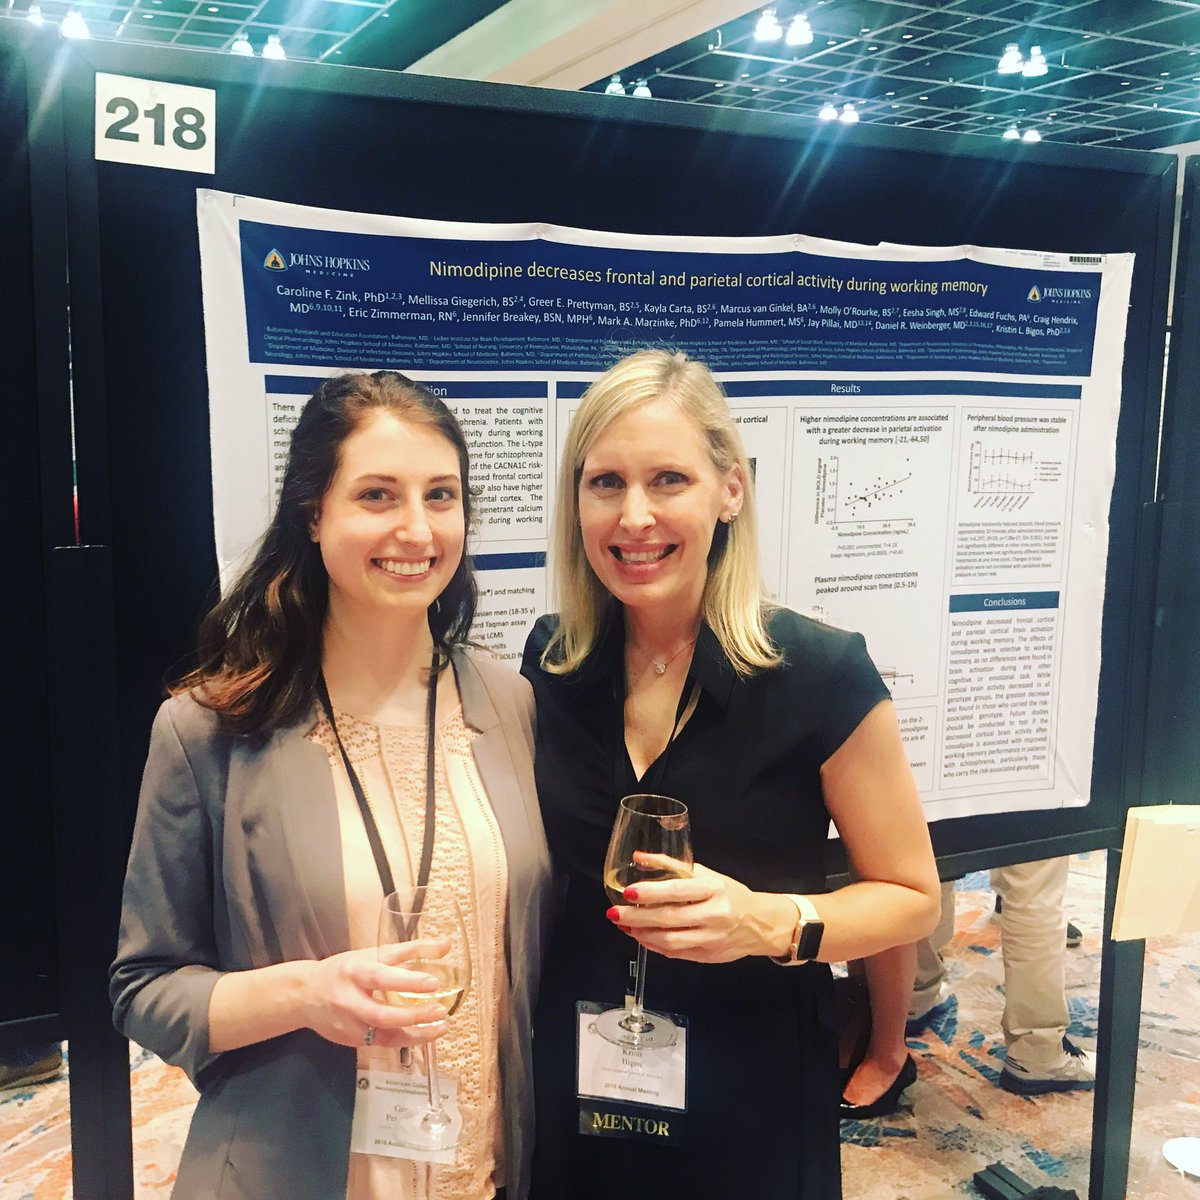 #ACNP2018 thanks for the opportunity to present our work on the neural effects of the #calciumchannelblocker nimodipine. Next up, let’s see if it improves #cognition in patients with #schizophrenia.